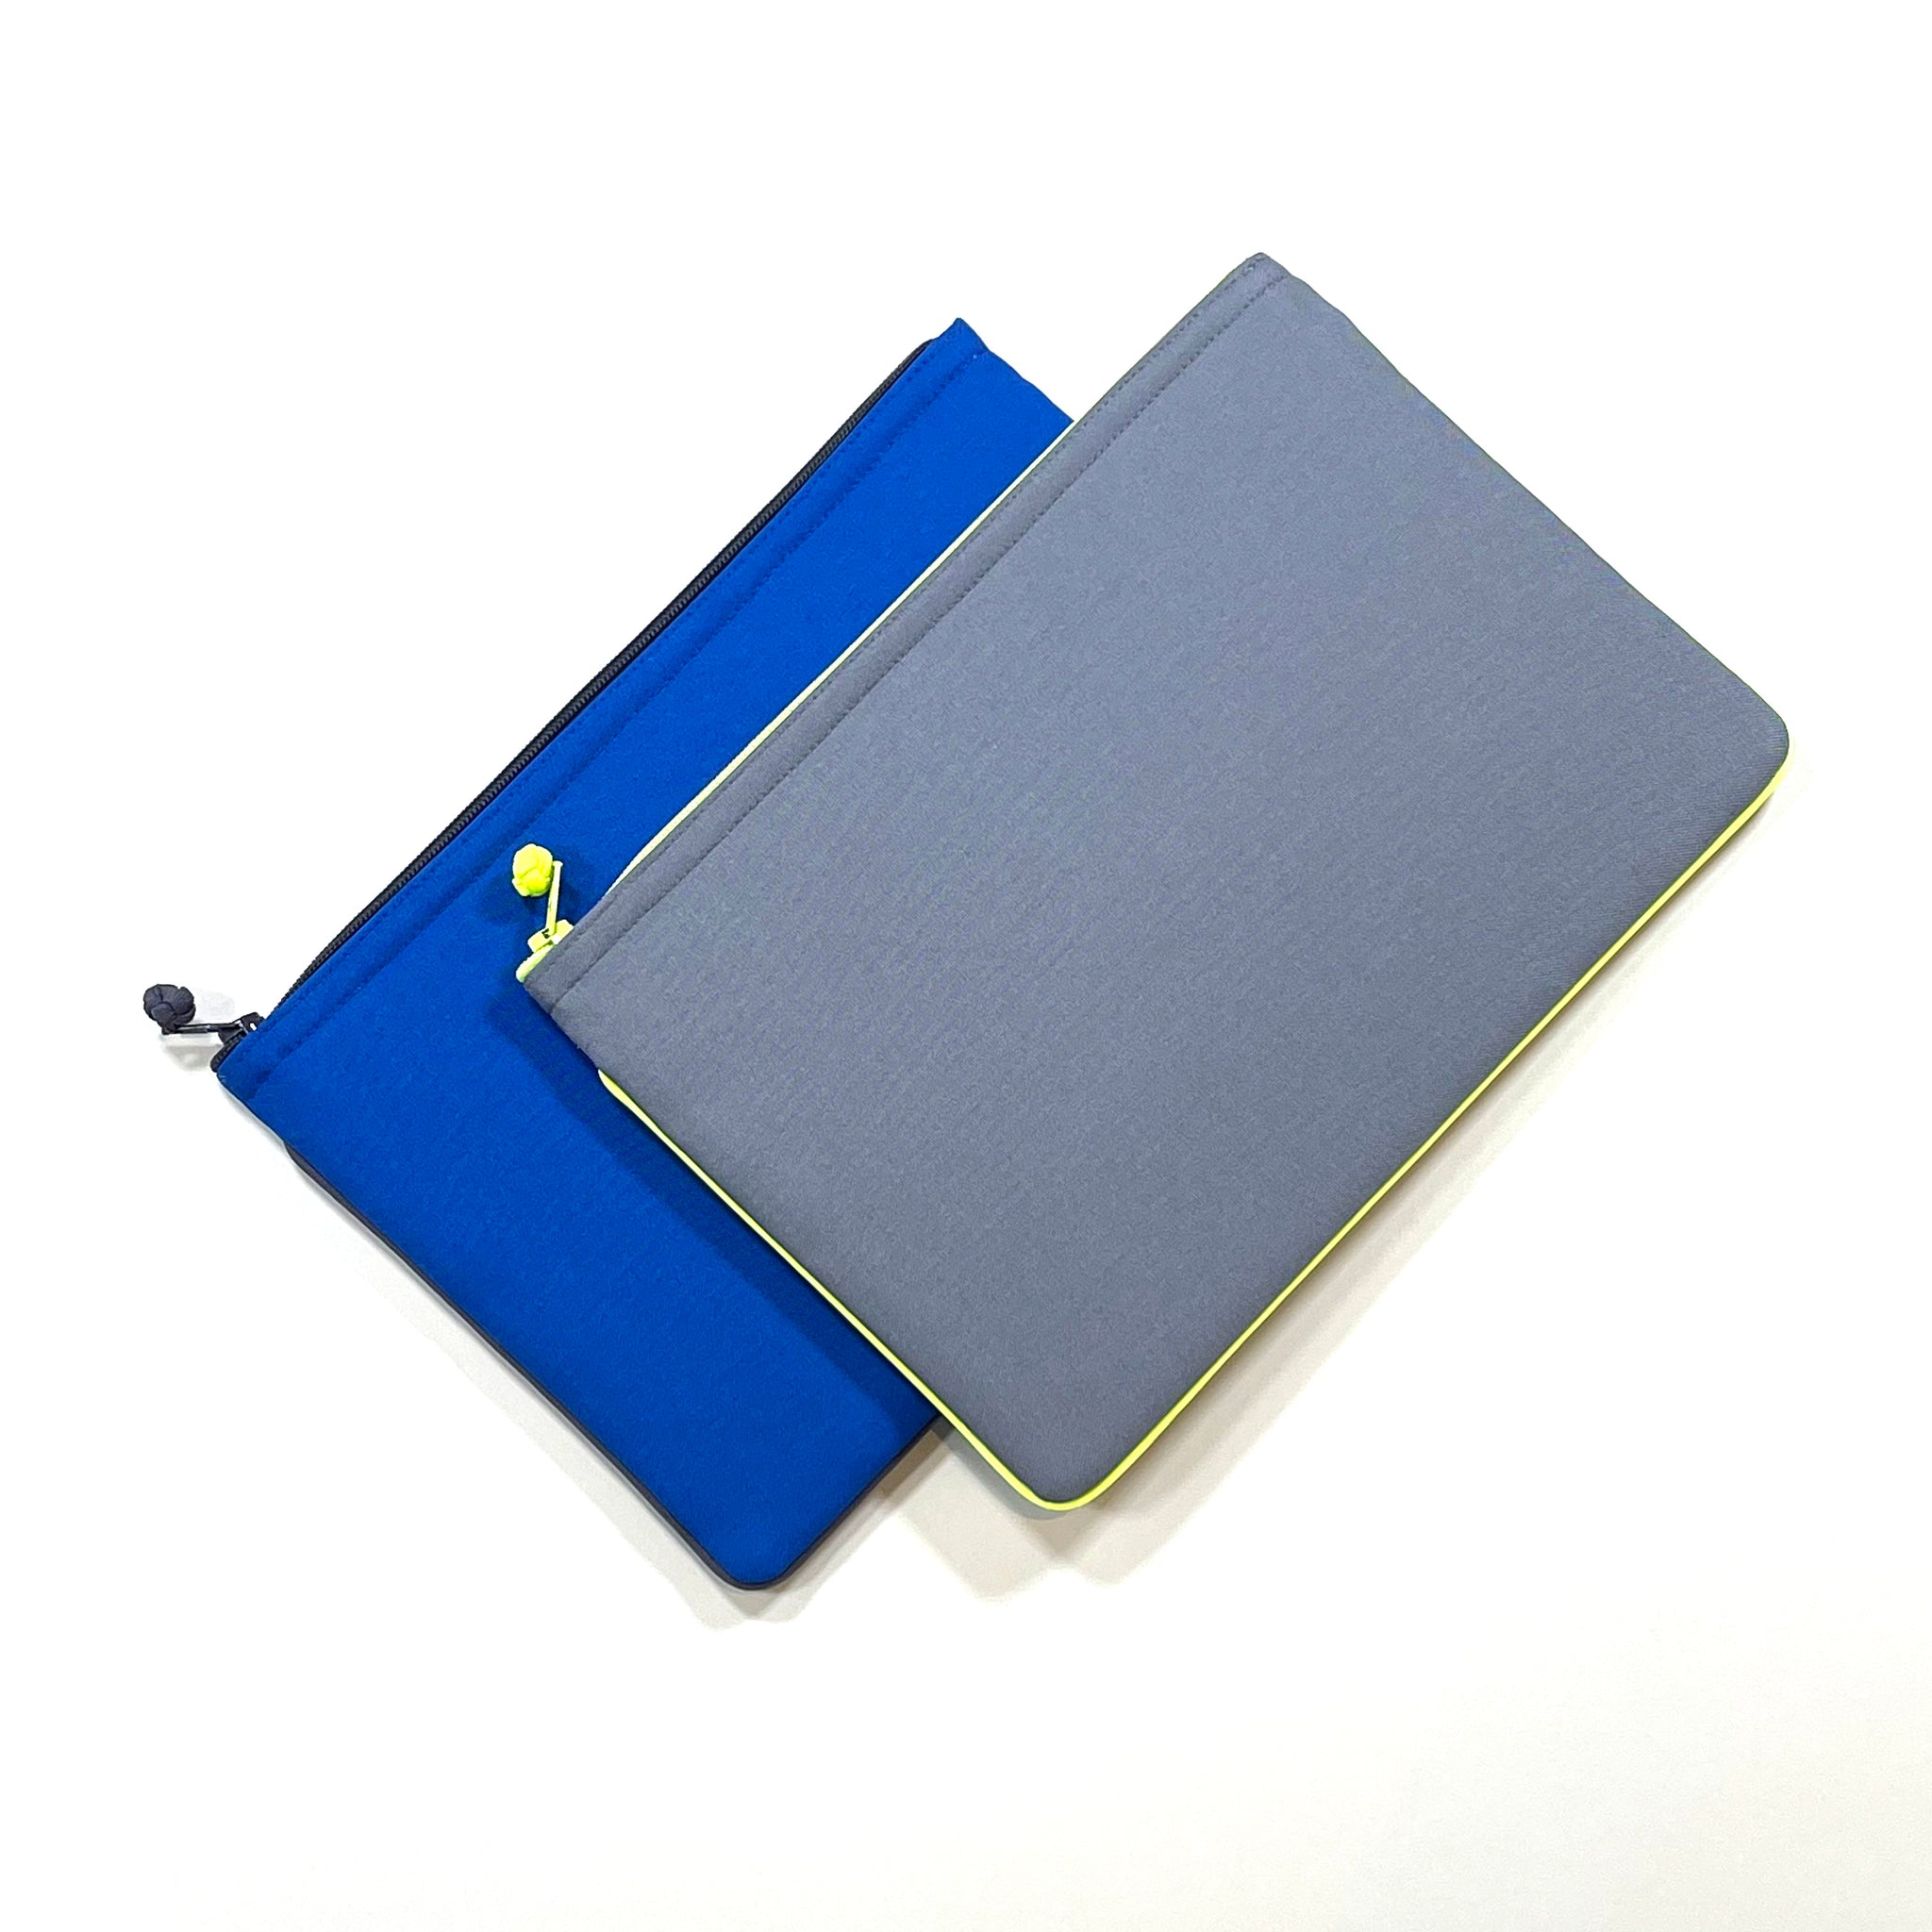 recycled laptop cases in two colours：blue and grey